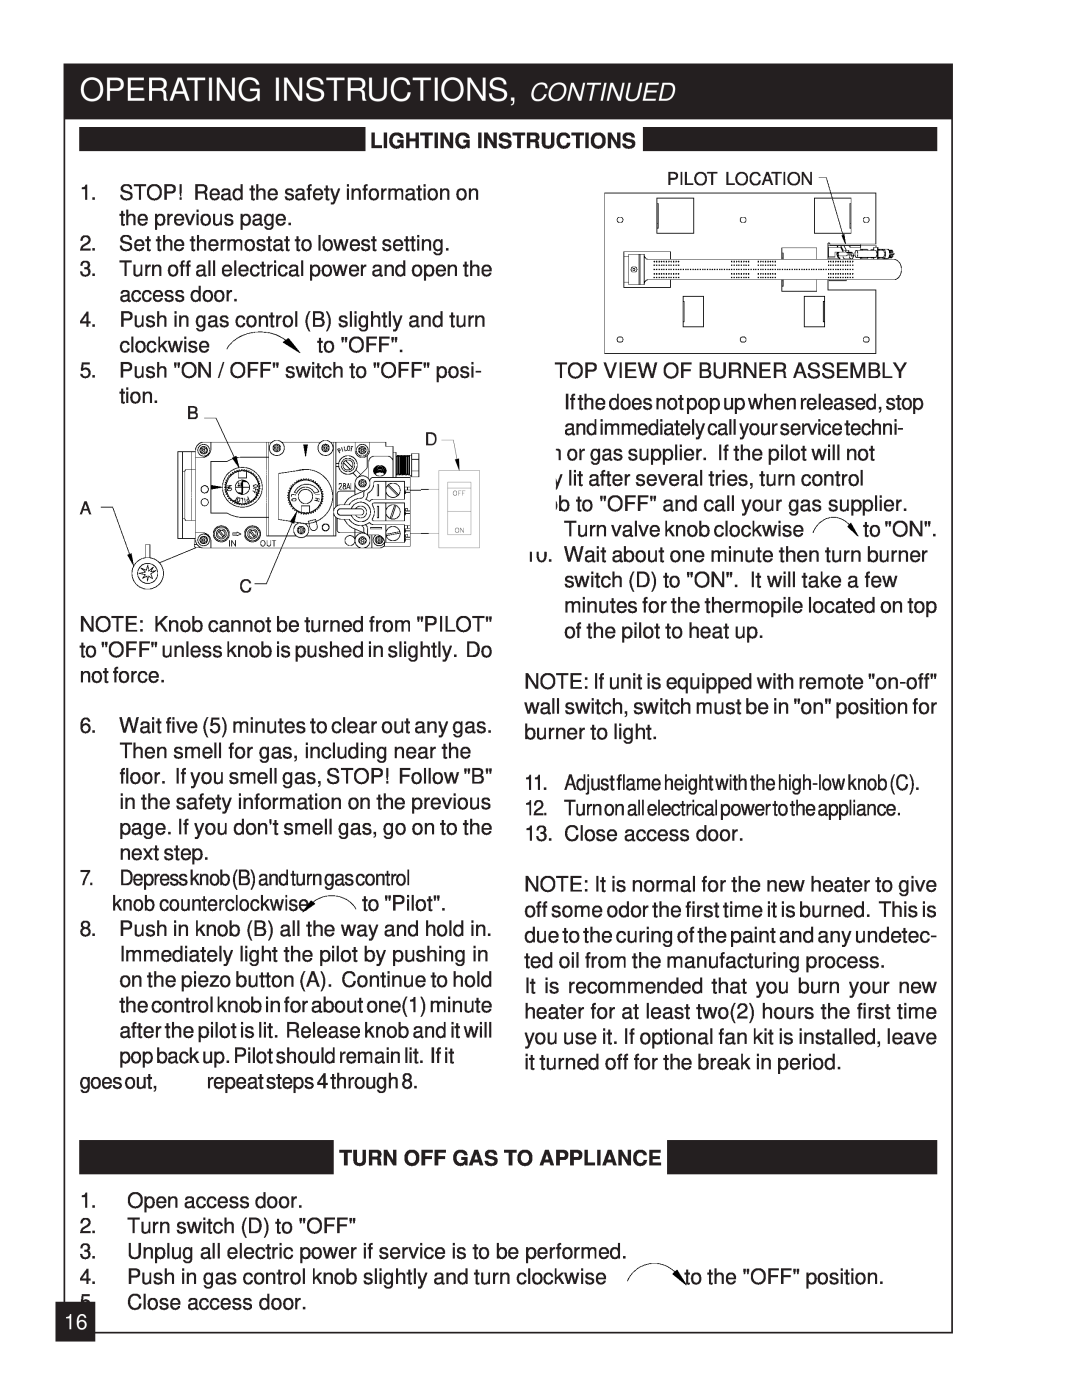 United States Stove 2020L Operating Instructions, Continued, Lighting Instructions, Turn Off Gas To Appliance 